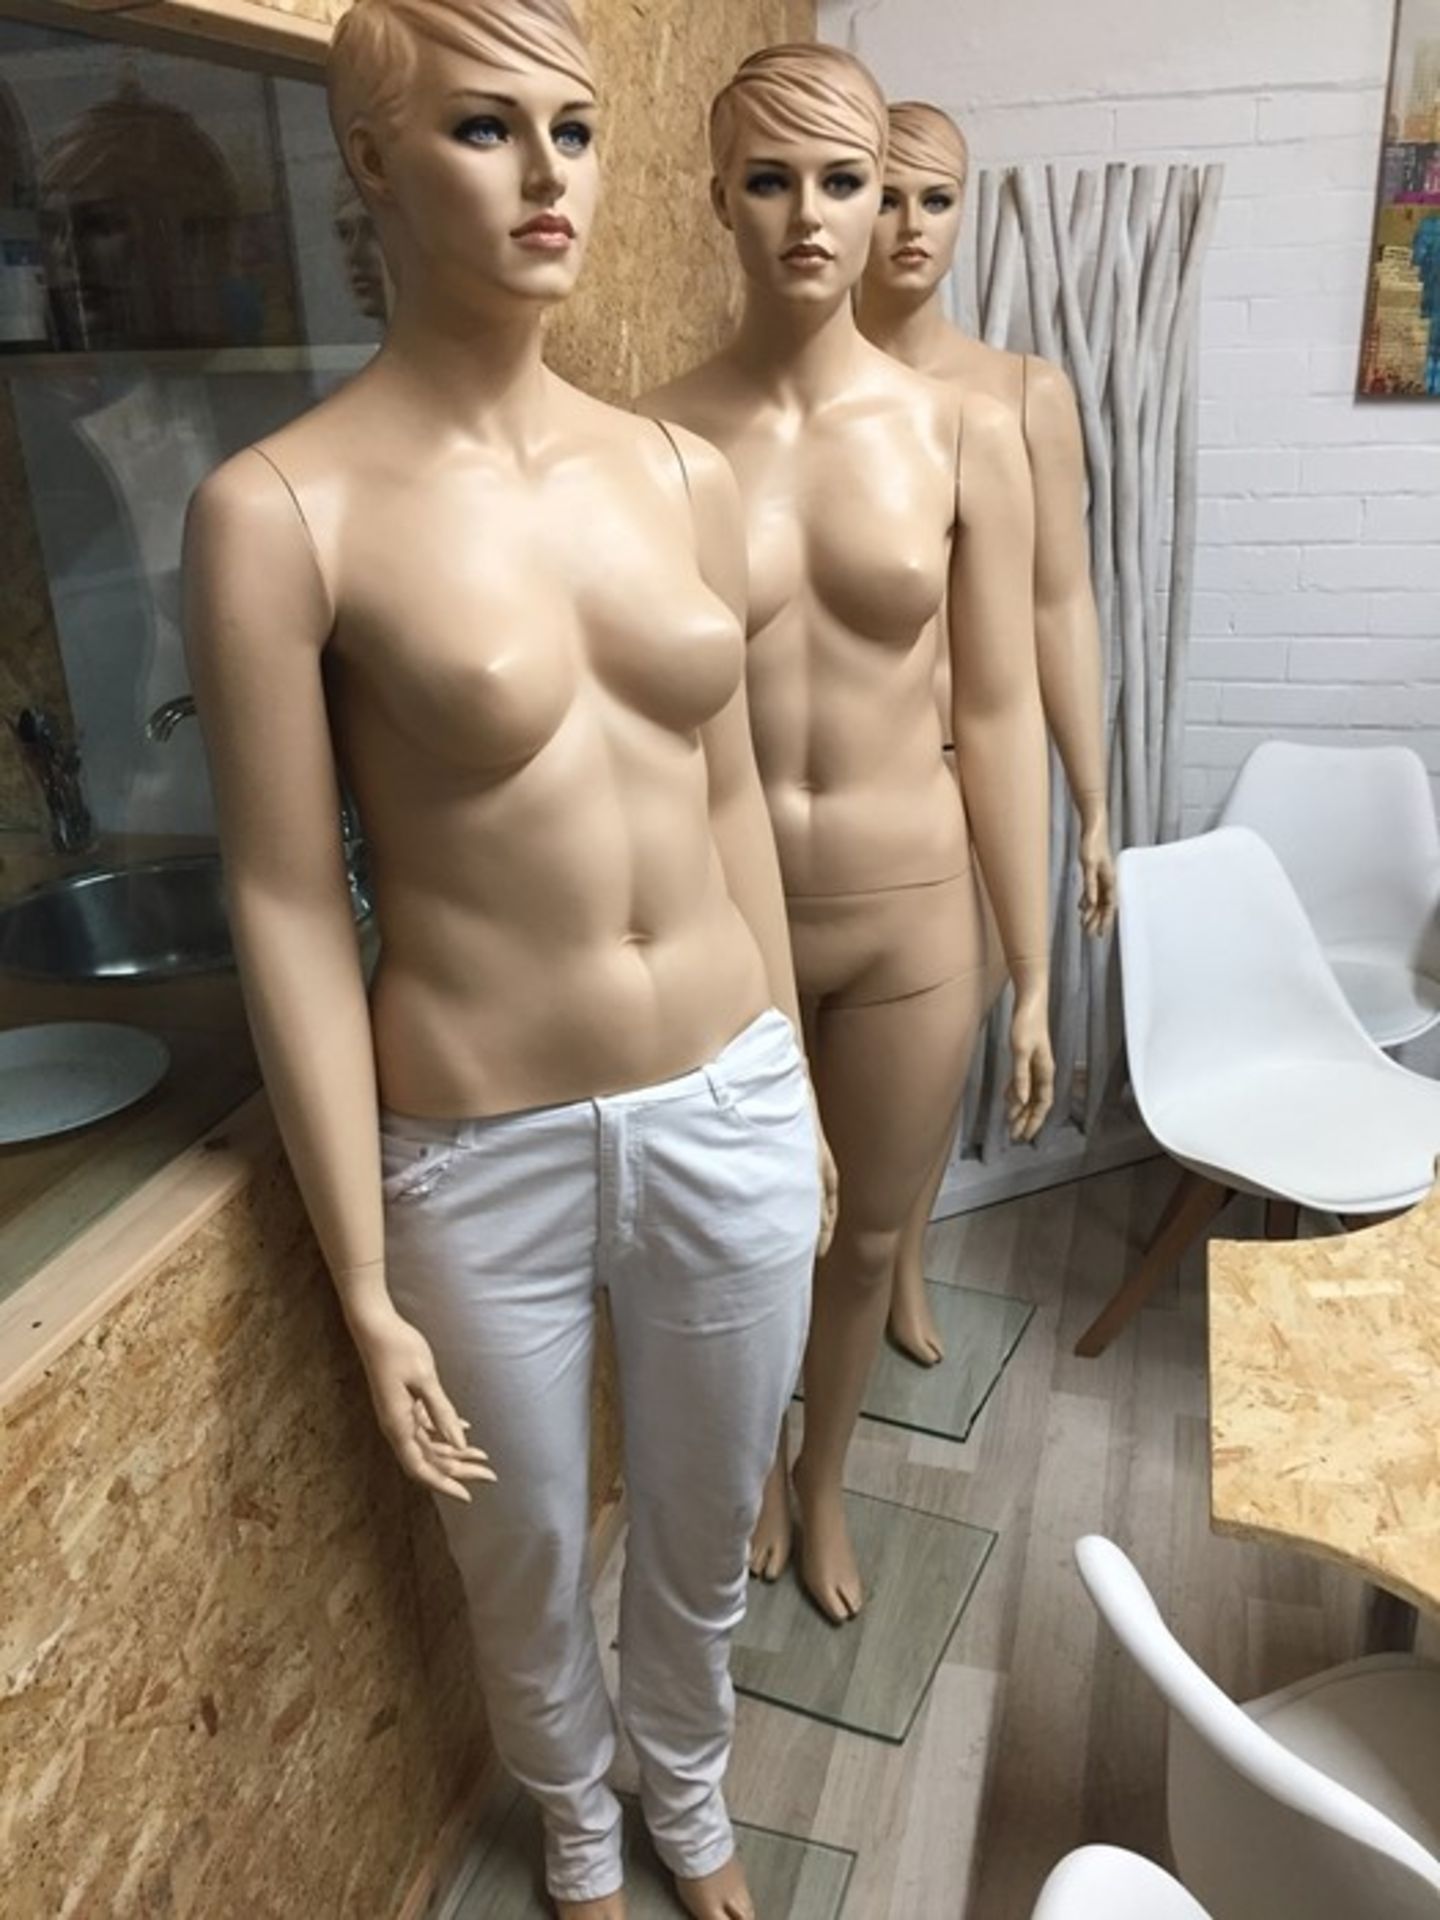 1 LOT TO CONTAIN A FULL SIZE FEMALE MANNEQUIN